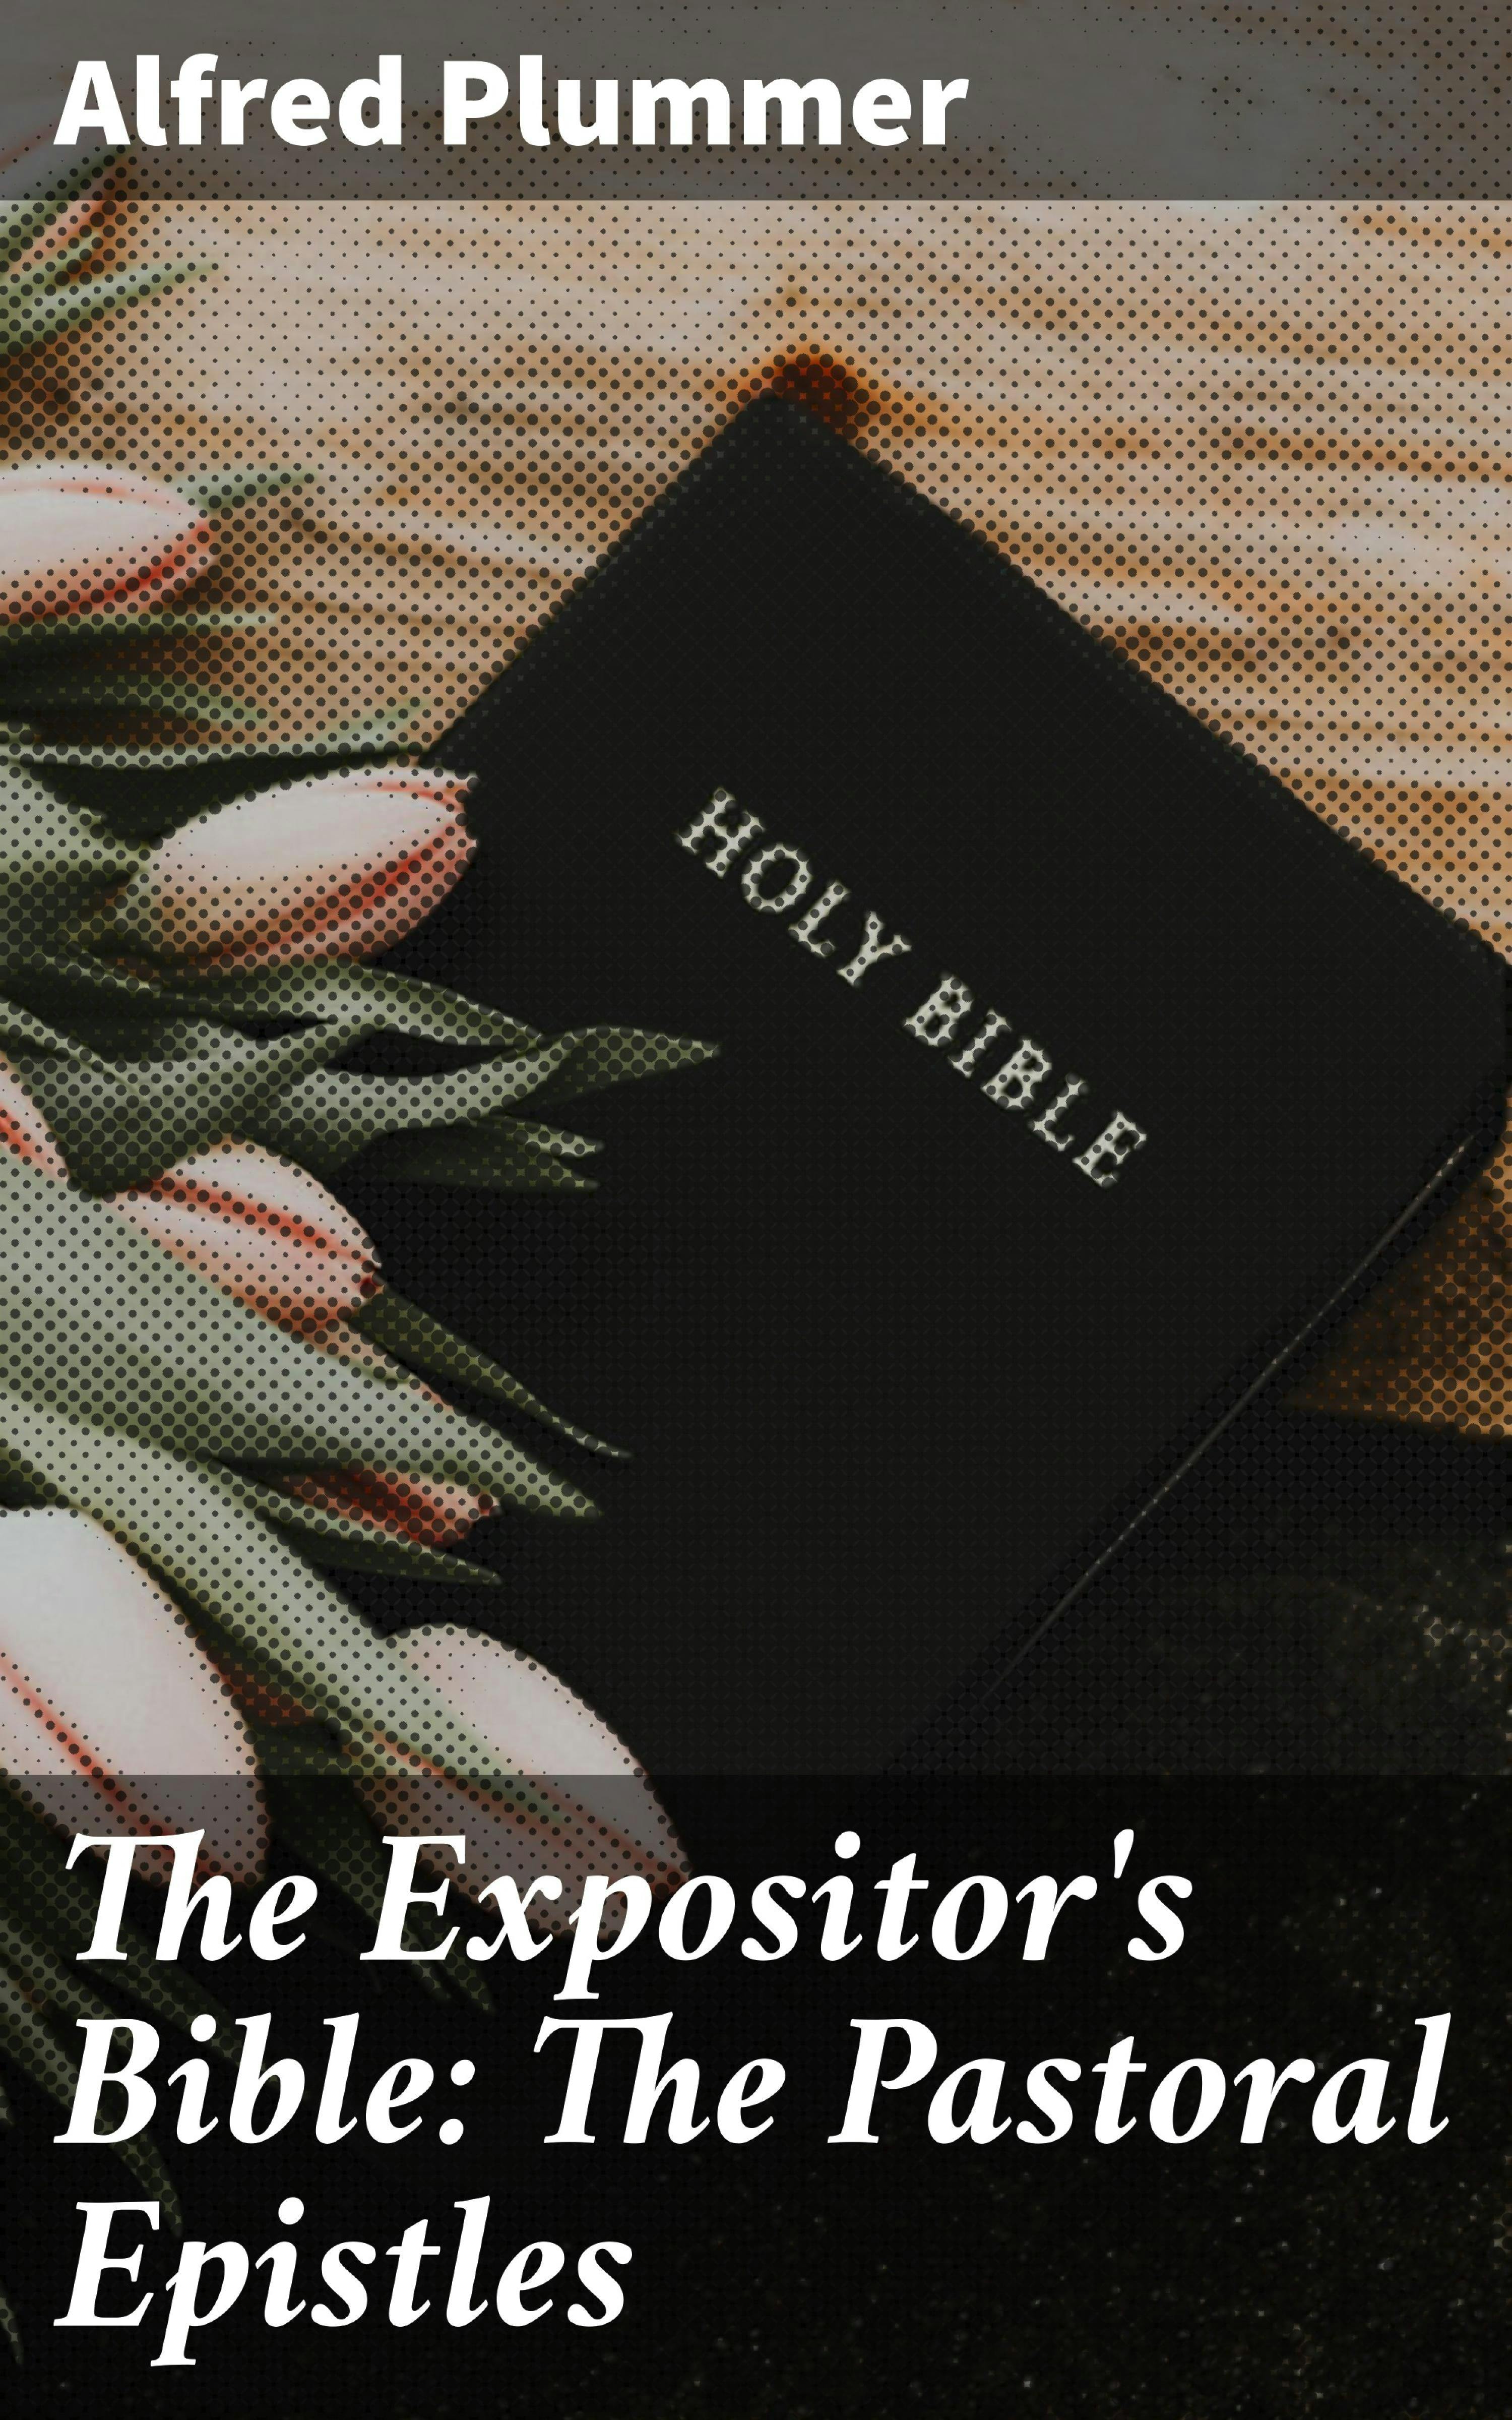 The Expositor's Bible: The Pastoral Epistles - Alfred Plummer